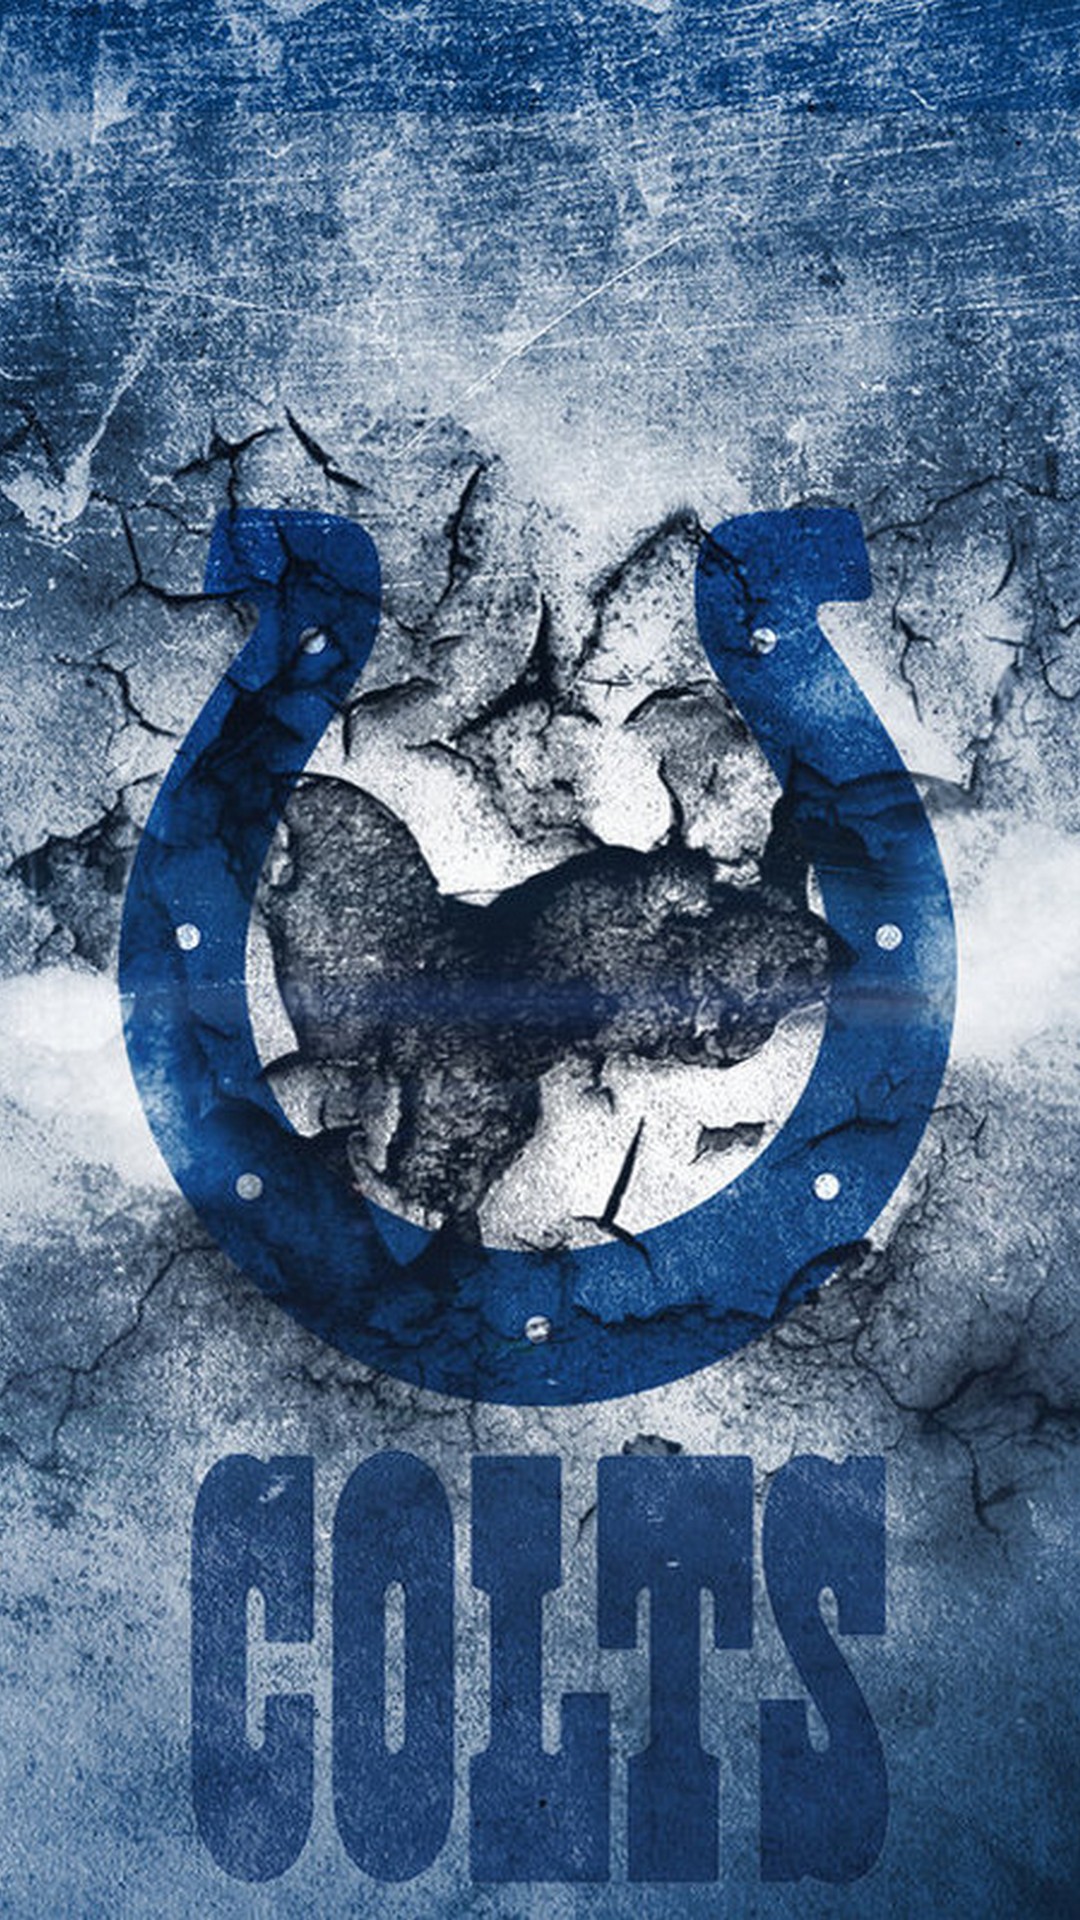 Screensaver iPhone Indianapolis Colts With high-resolution 1080X1920 pixel. Donwload and set as wallpaper for your iPhone X, iPhone XS home screen backgrounds, XS Max, XR, iPhone8 lock screen wallpaper, iPhone 7, 6, SE, and other mobile devices